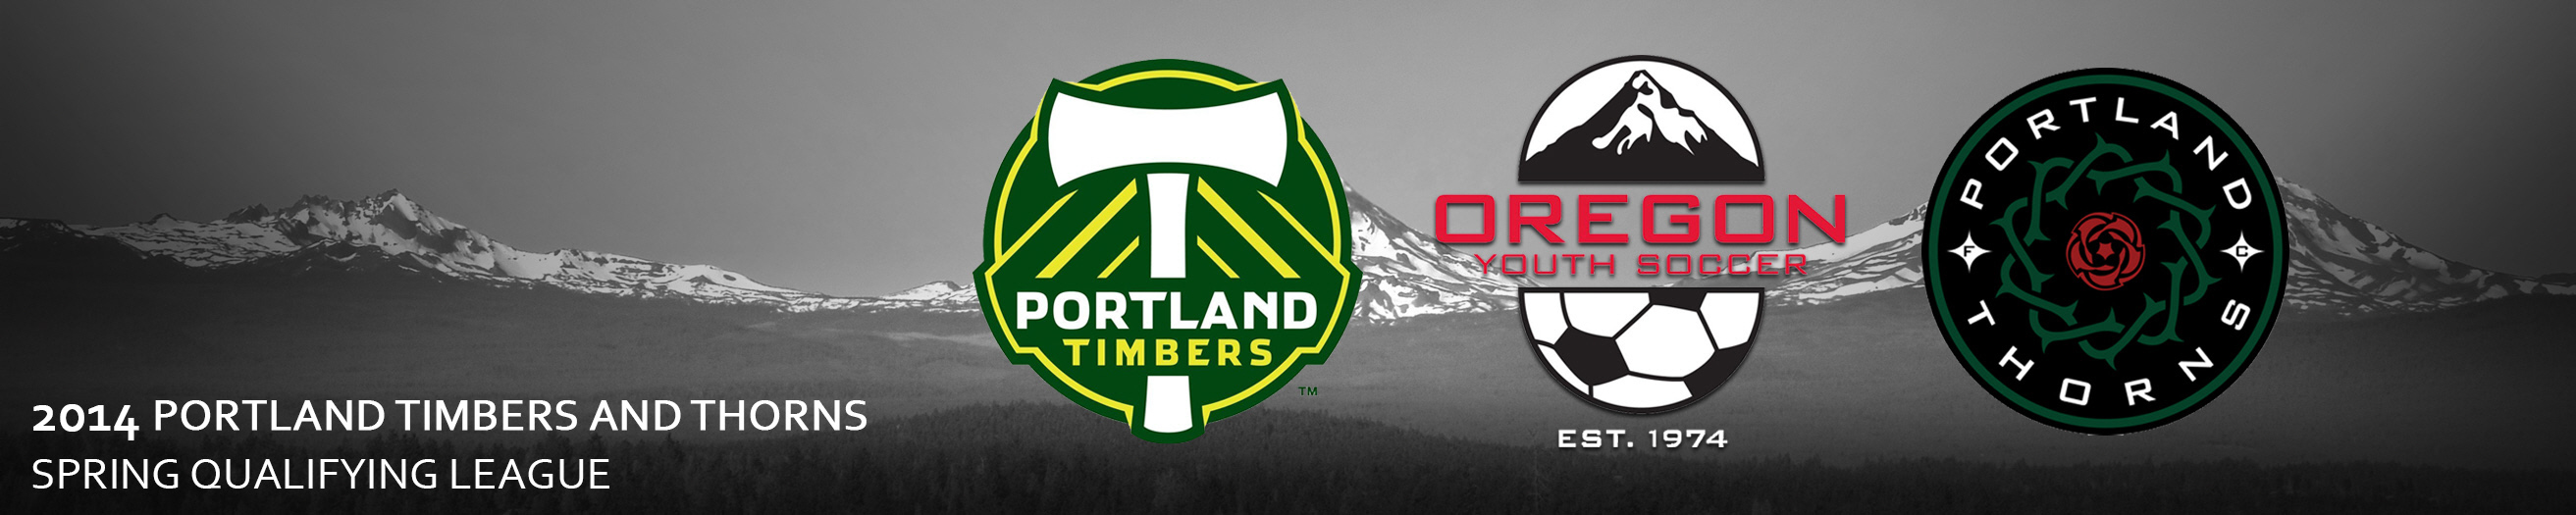 2014 Portland Timbers and Thorns Spring Qualifying League banner